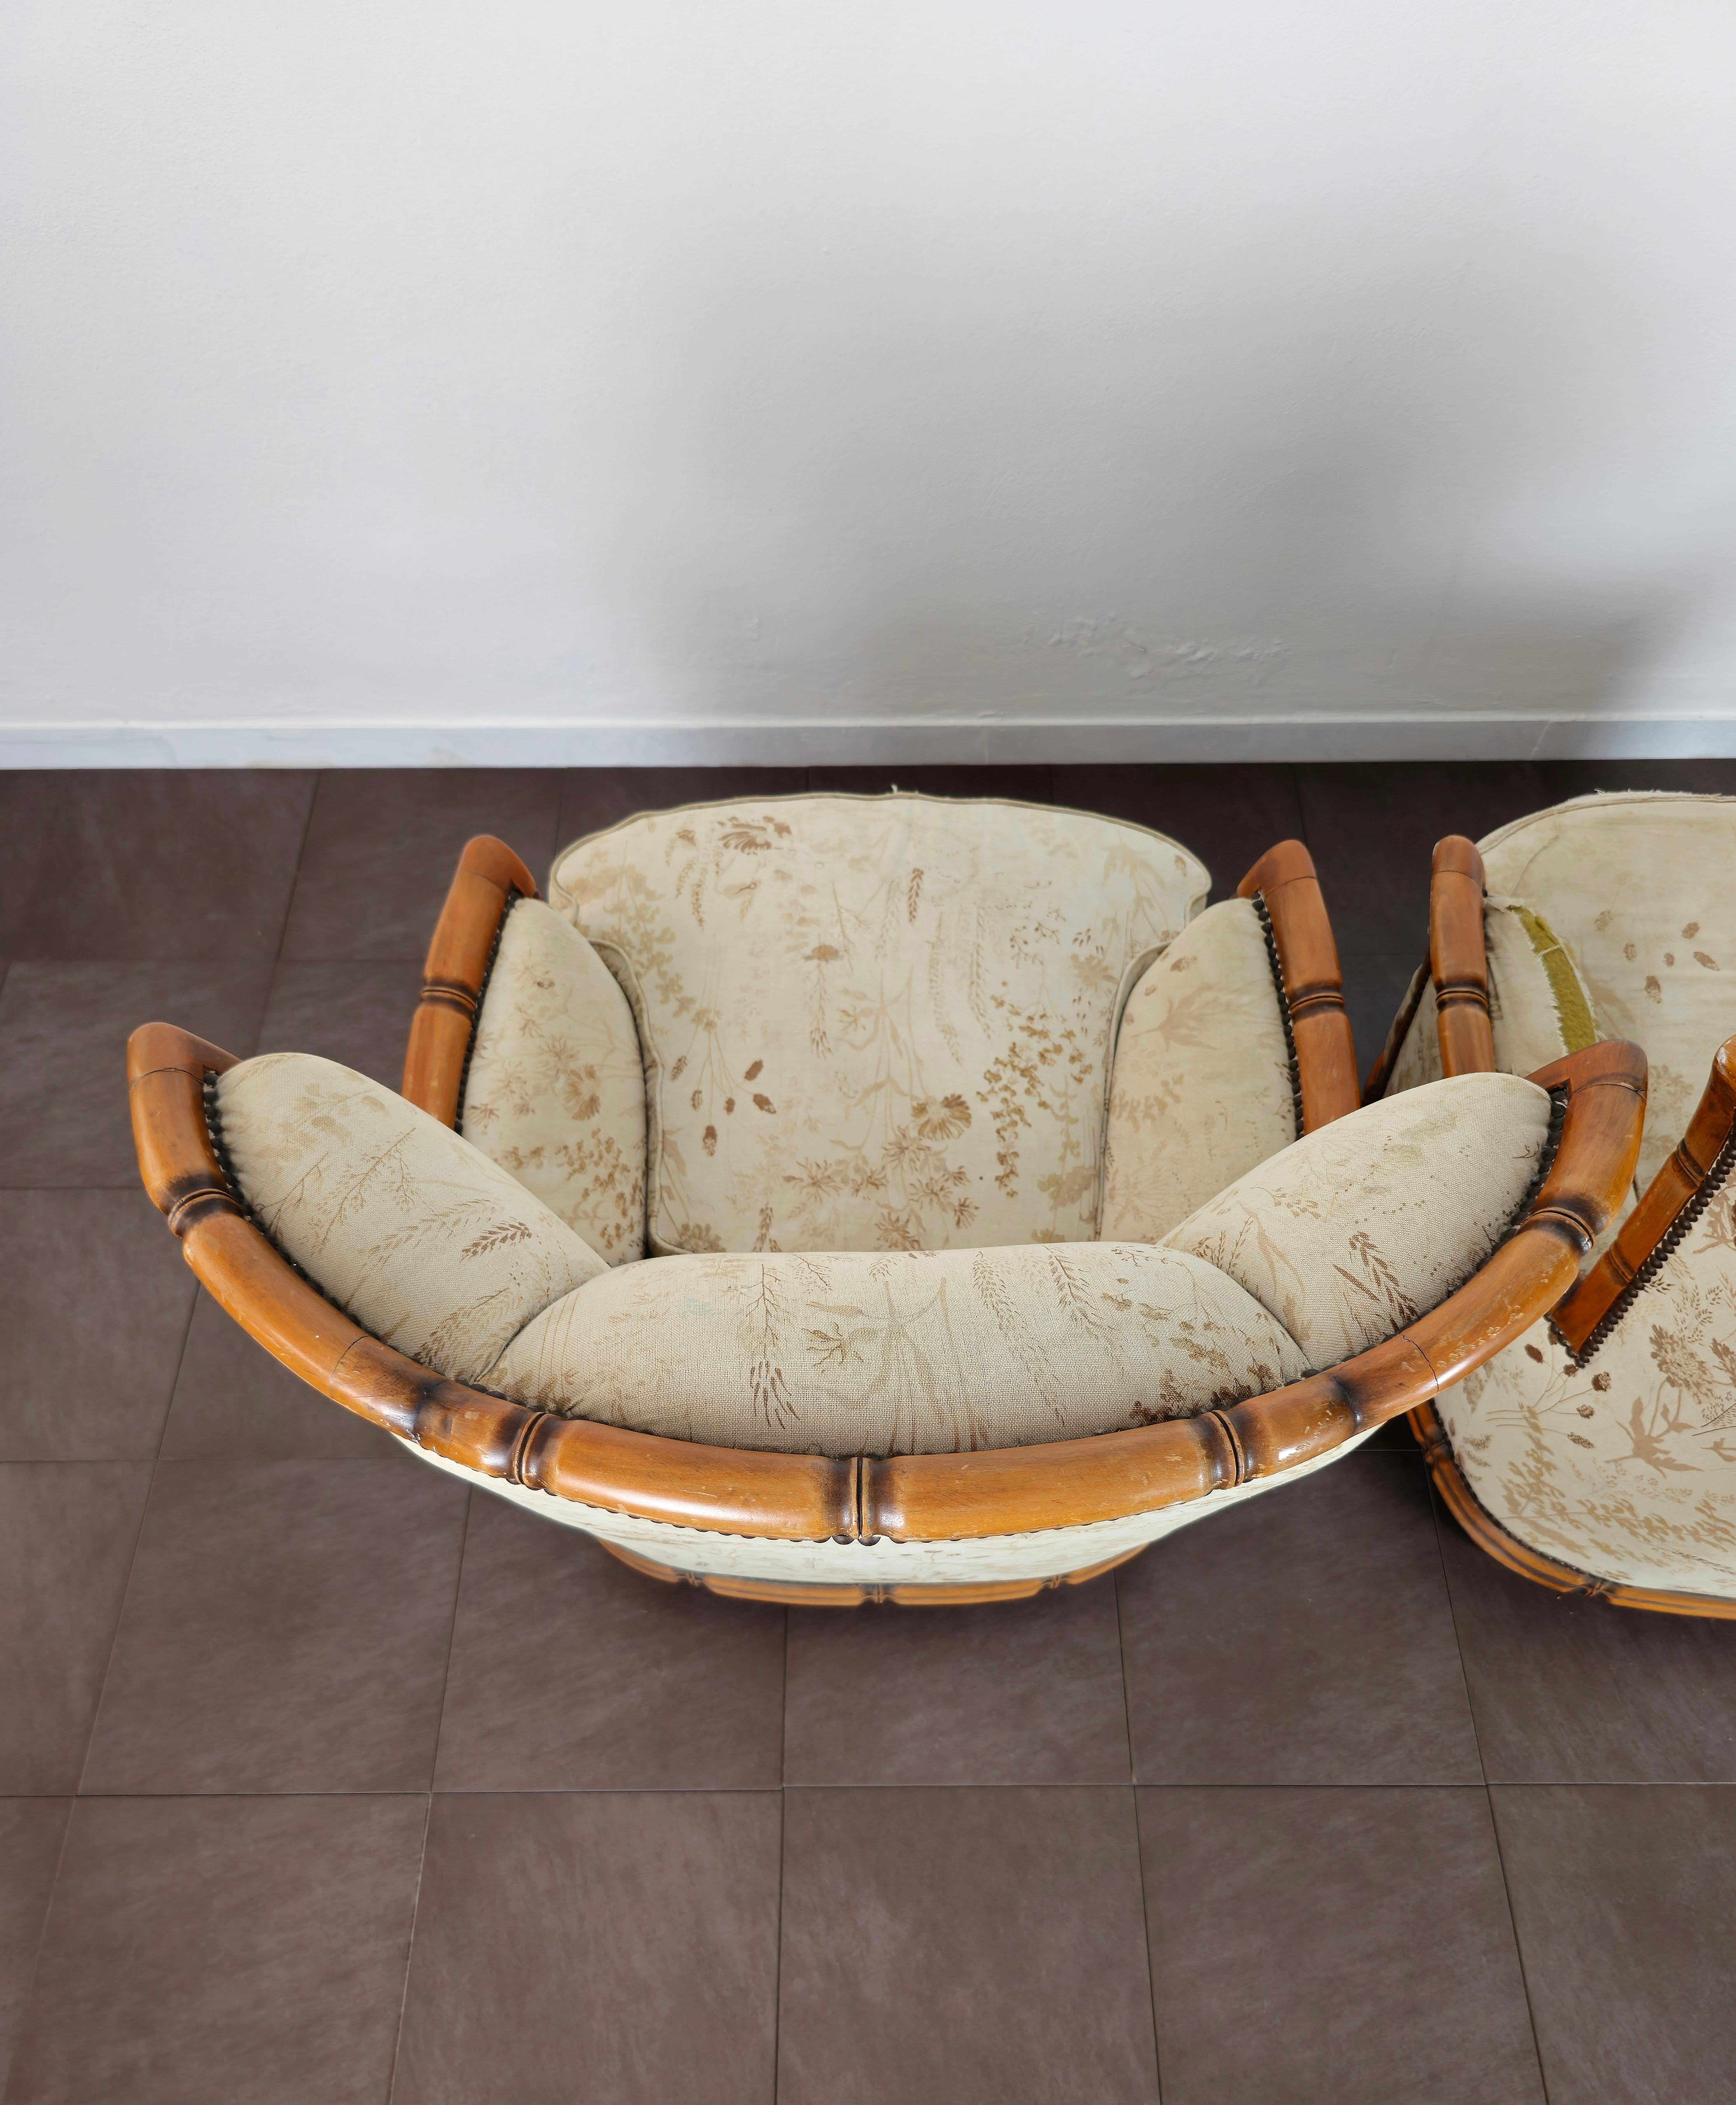 Pair of Armchairs Wood Fabric Giorgetti Midcentury Modern Italian Design 1960s For Sale 1